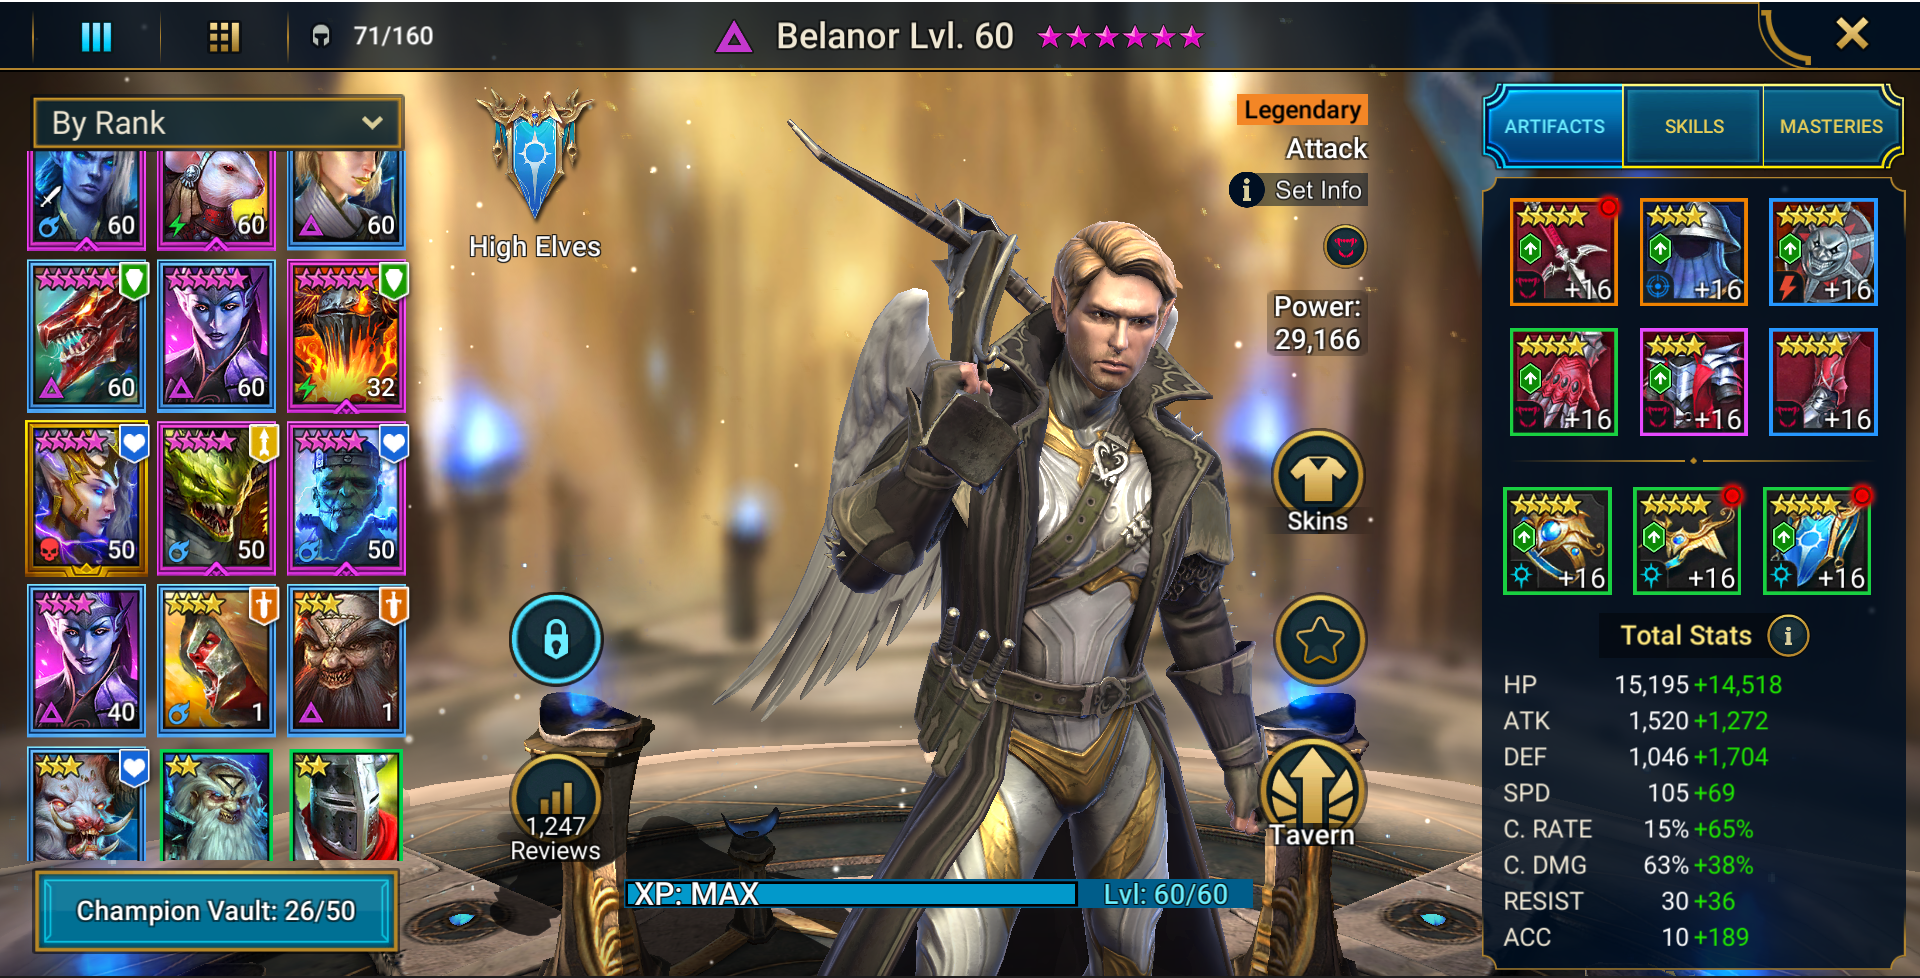 Belanor gear and stats build